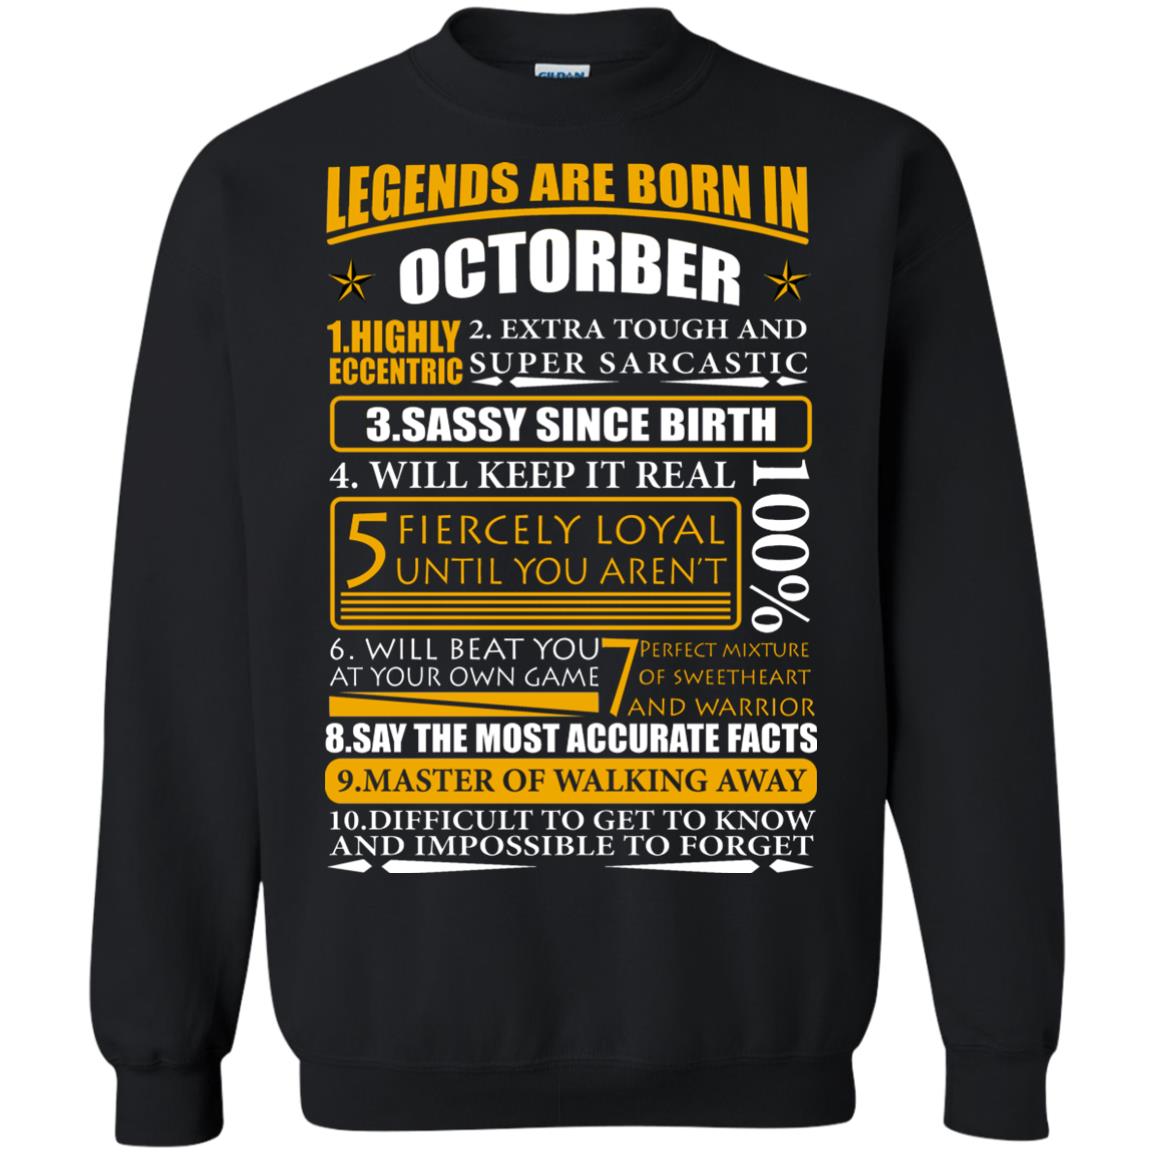 Legends Are Born In October - Highly Eccentric Shirt | AllBlueTees